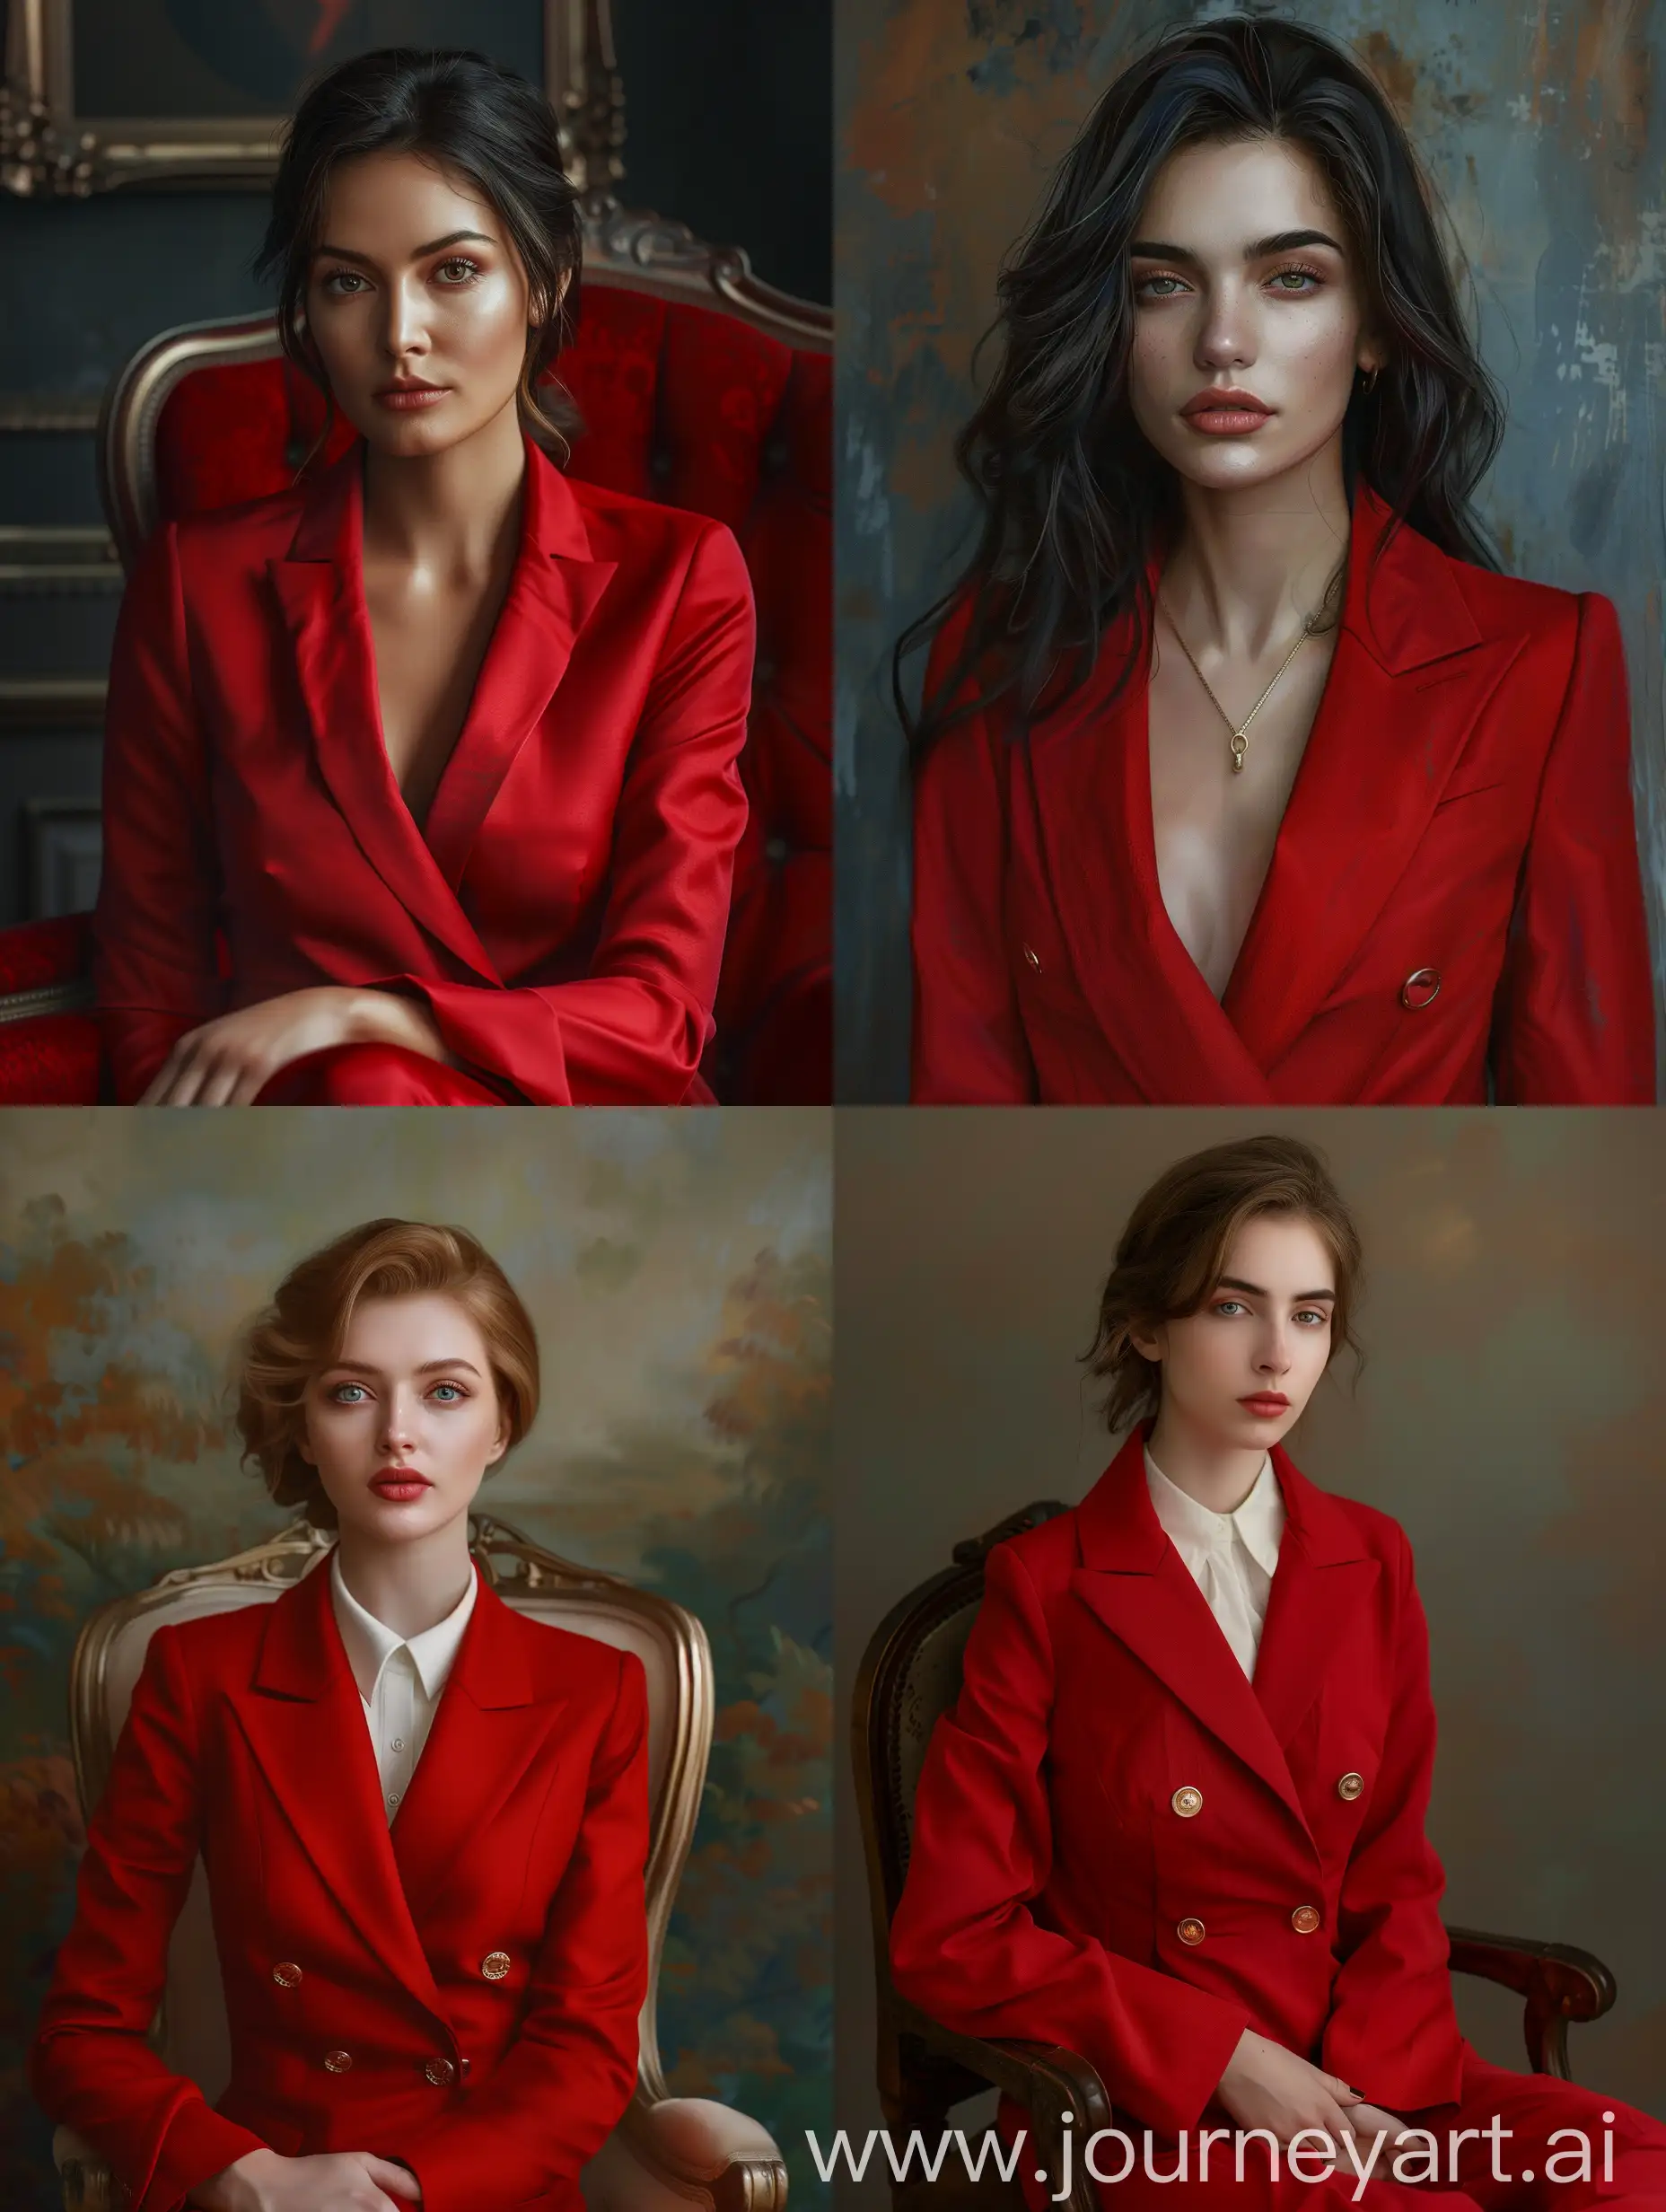 Cinematic-8K-Portrait-of-a-Realistic-Woman-in-a-Red-Suit